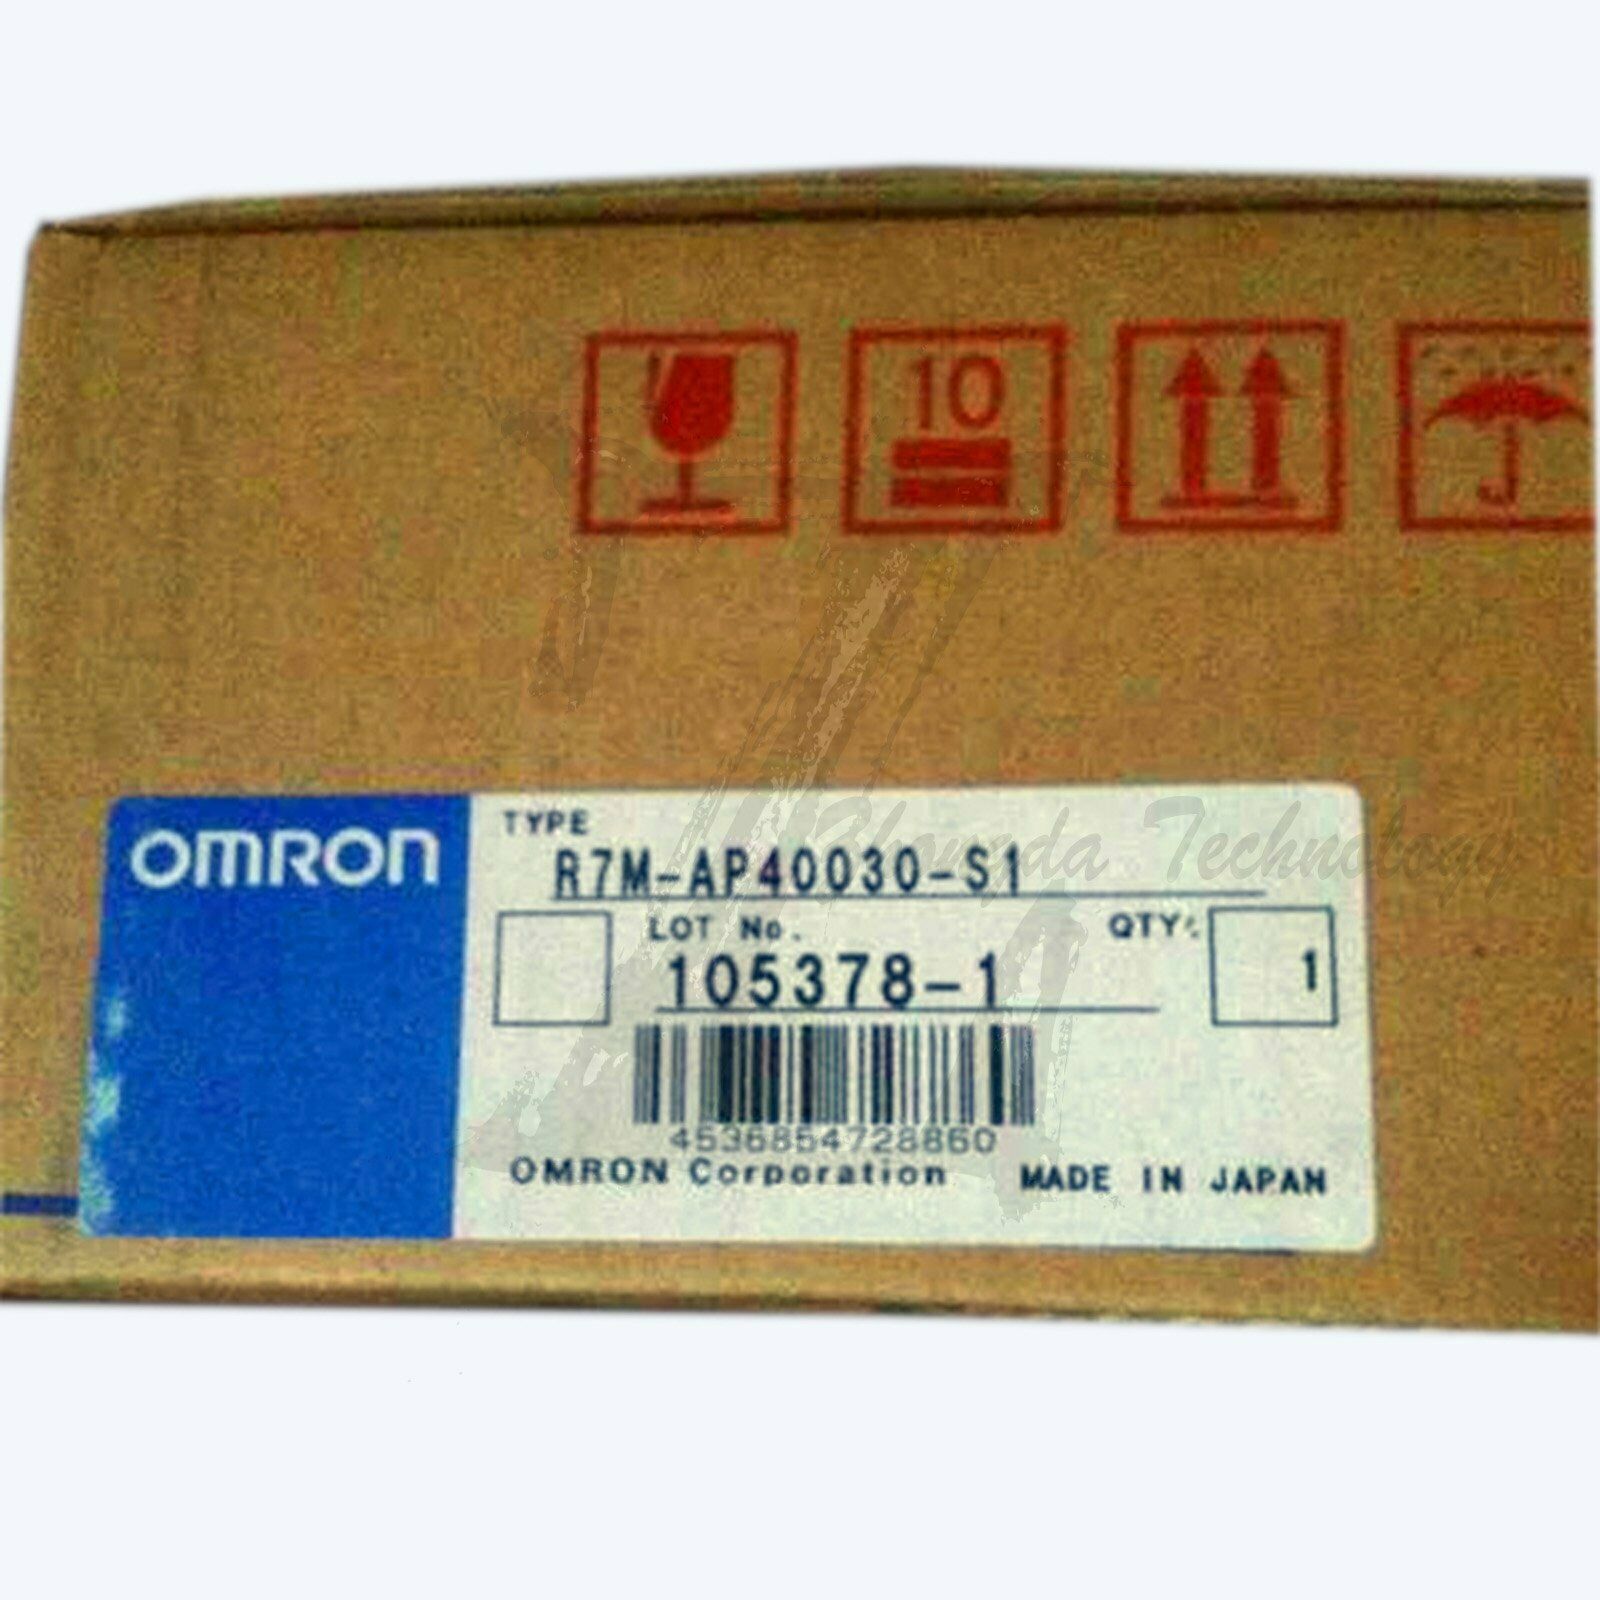 1PC new OMRON motor R7M-AP40030-S1 module one year warranty KOEED 500+, 80%, import_2020_10_10_031751, Omron, Other